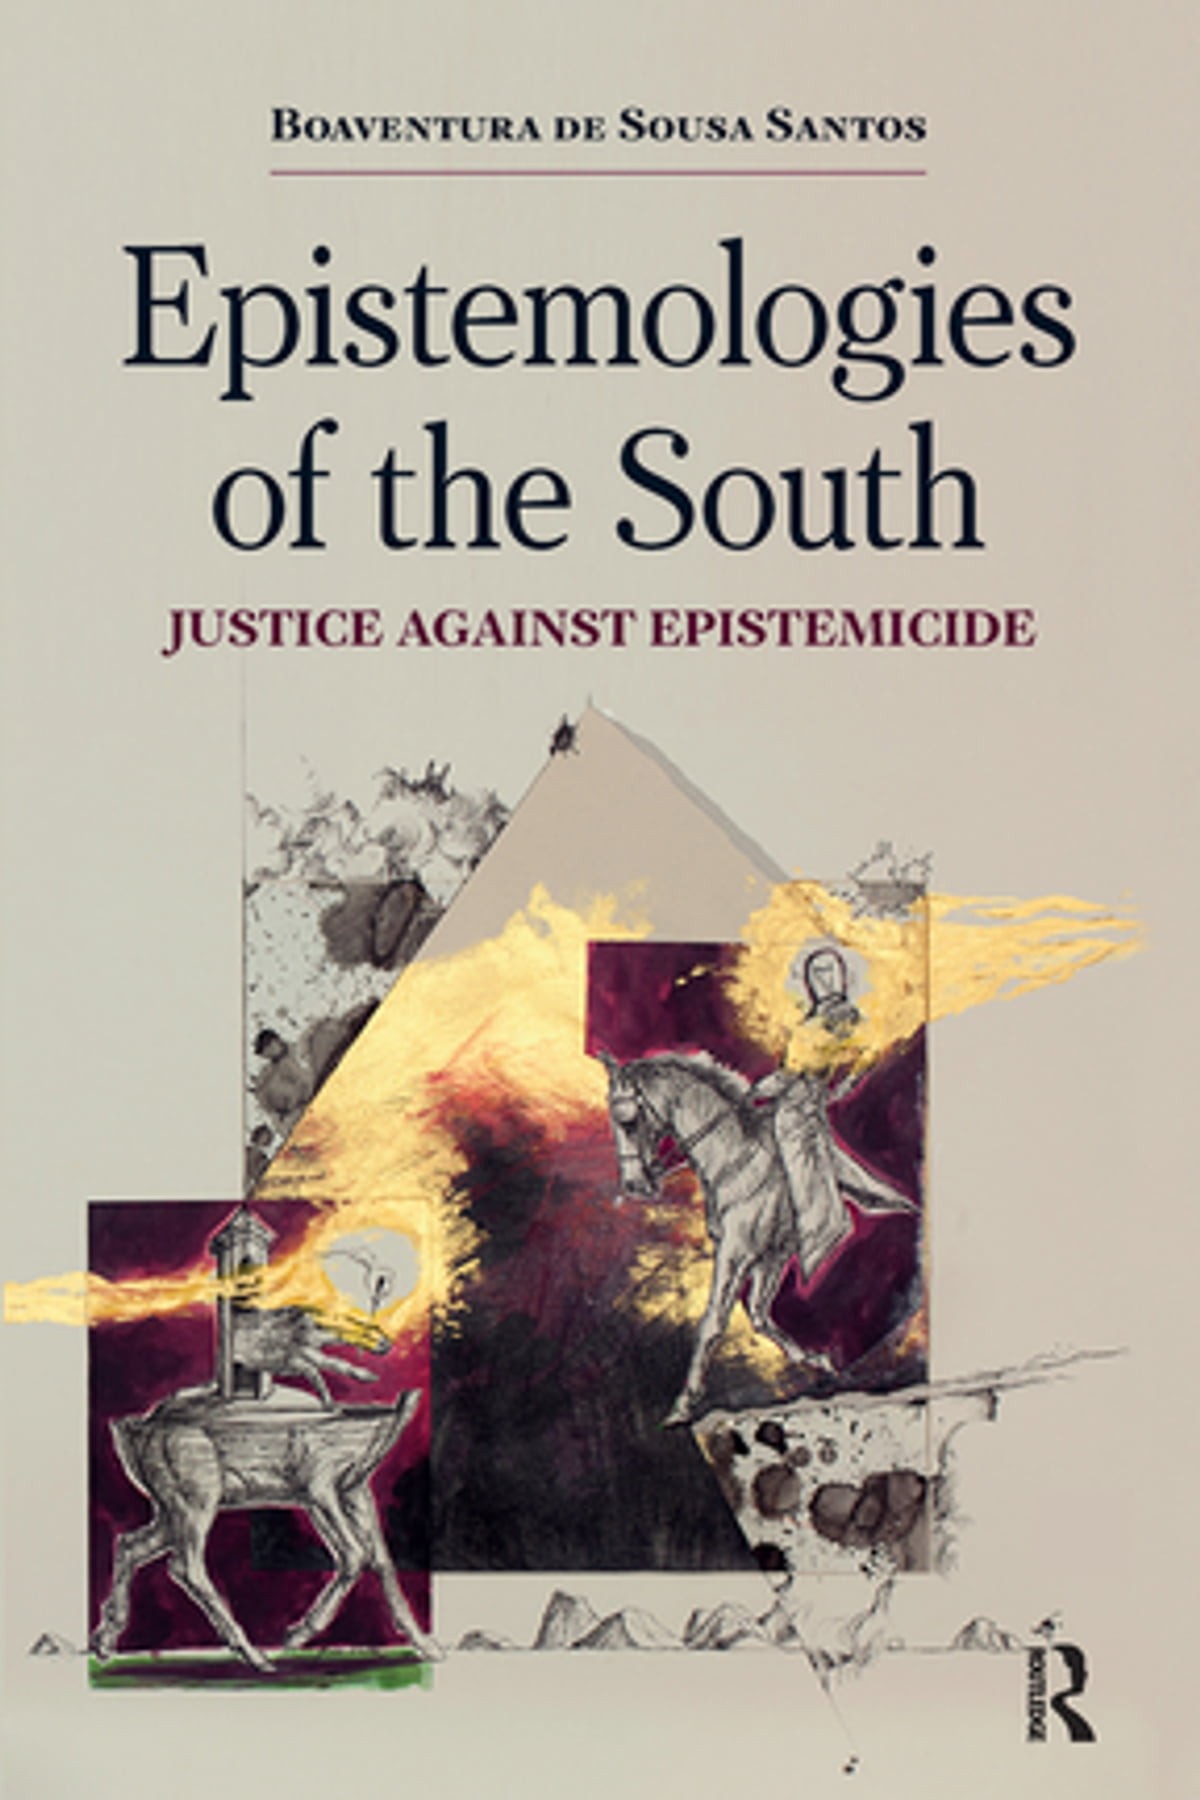 Epistemologies of the South: Justice Against Epistemicide